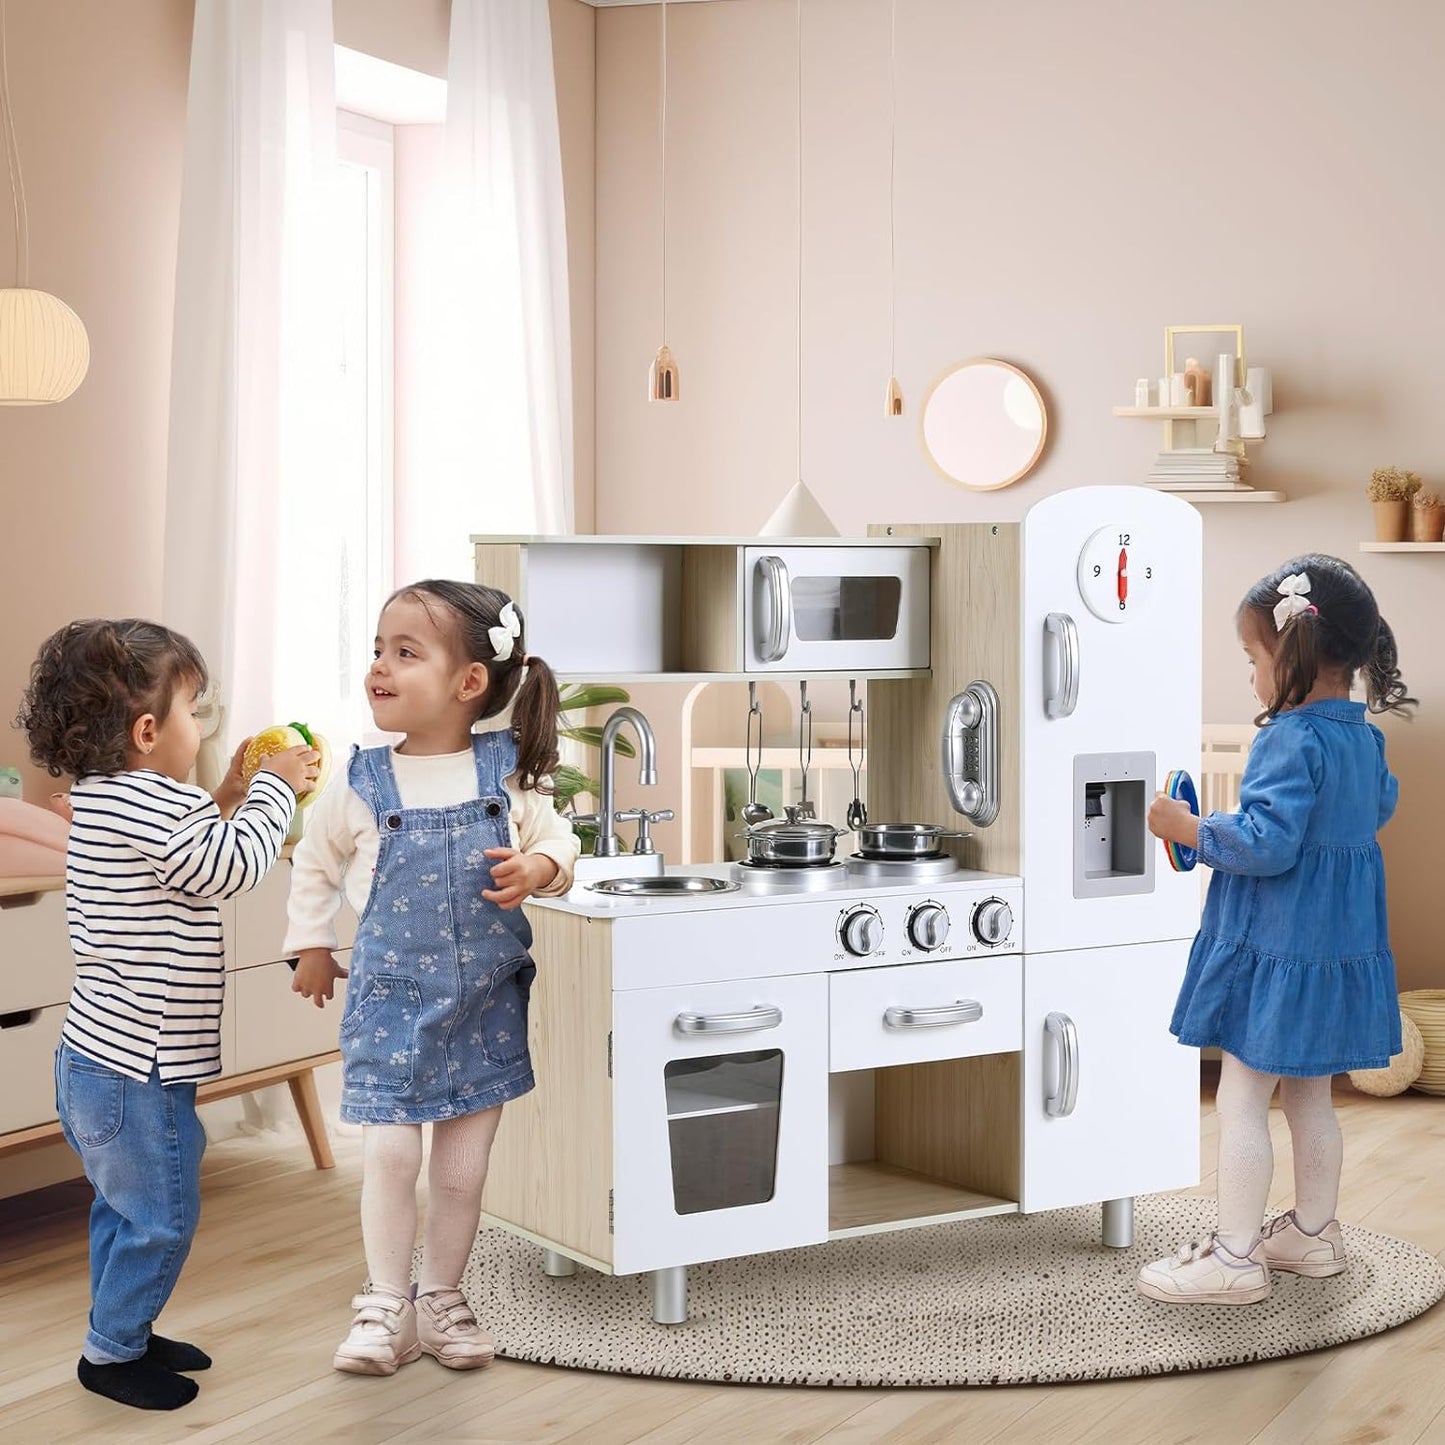 Arlopu Pretend Play Kitchen Wooden Toy Kitchen Playset for Kids with Telephone, Utensils, Oven, Microwave